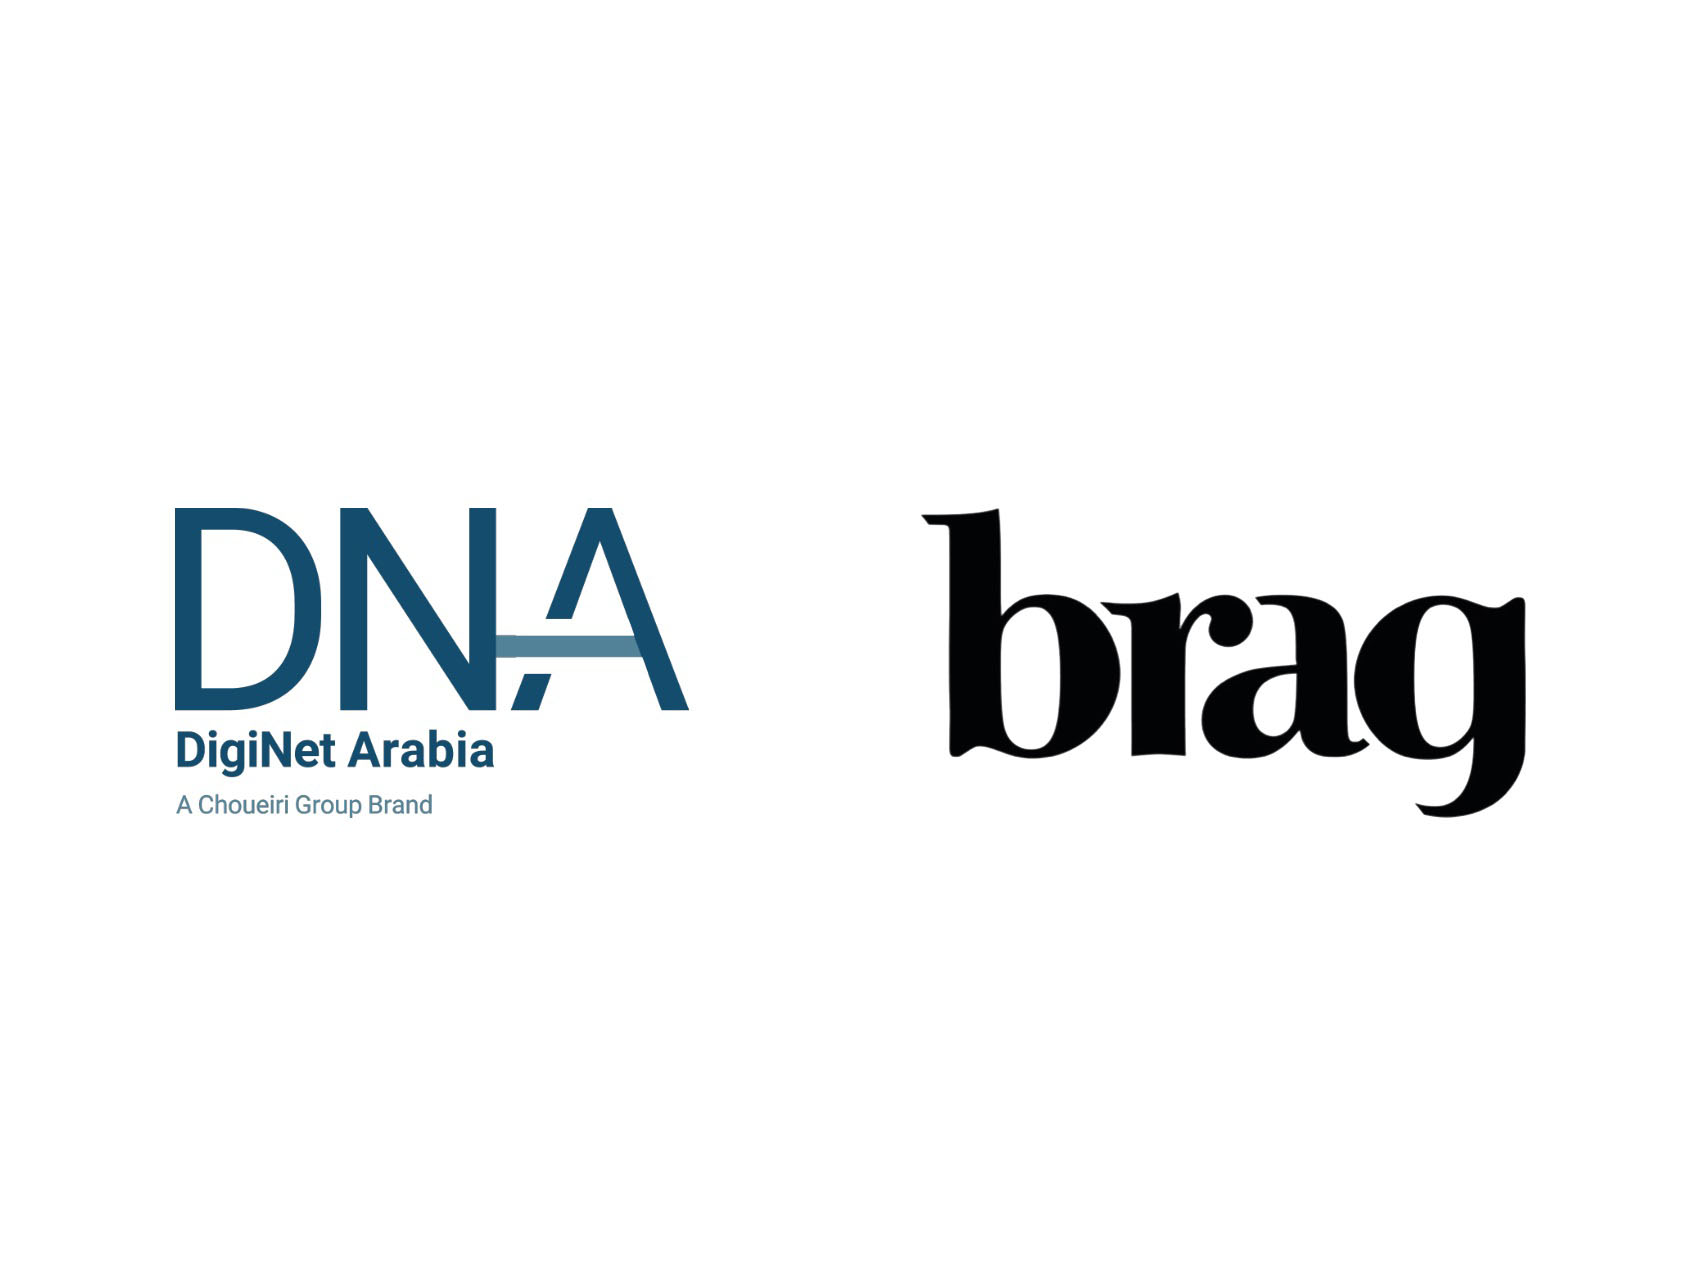 Choueiri Group’s DigiNet Arabia (DNA) appointed exclusive media rep for event agency Brag 